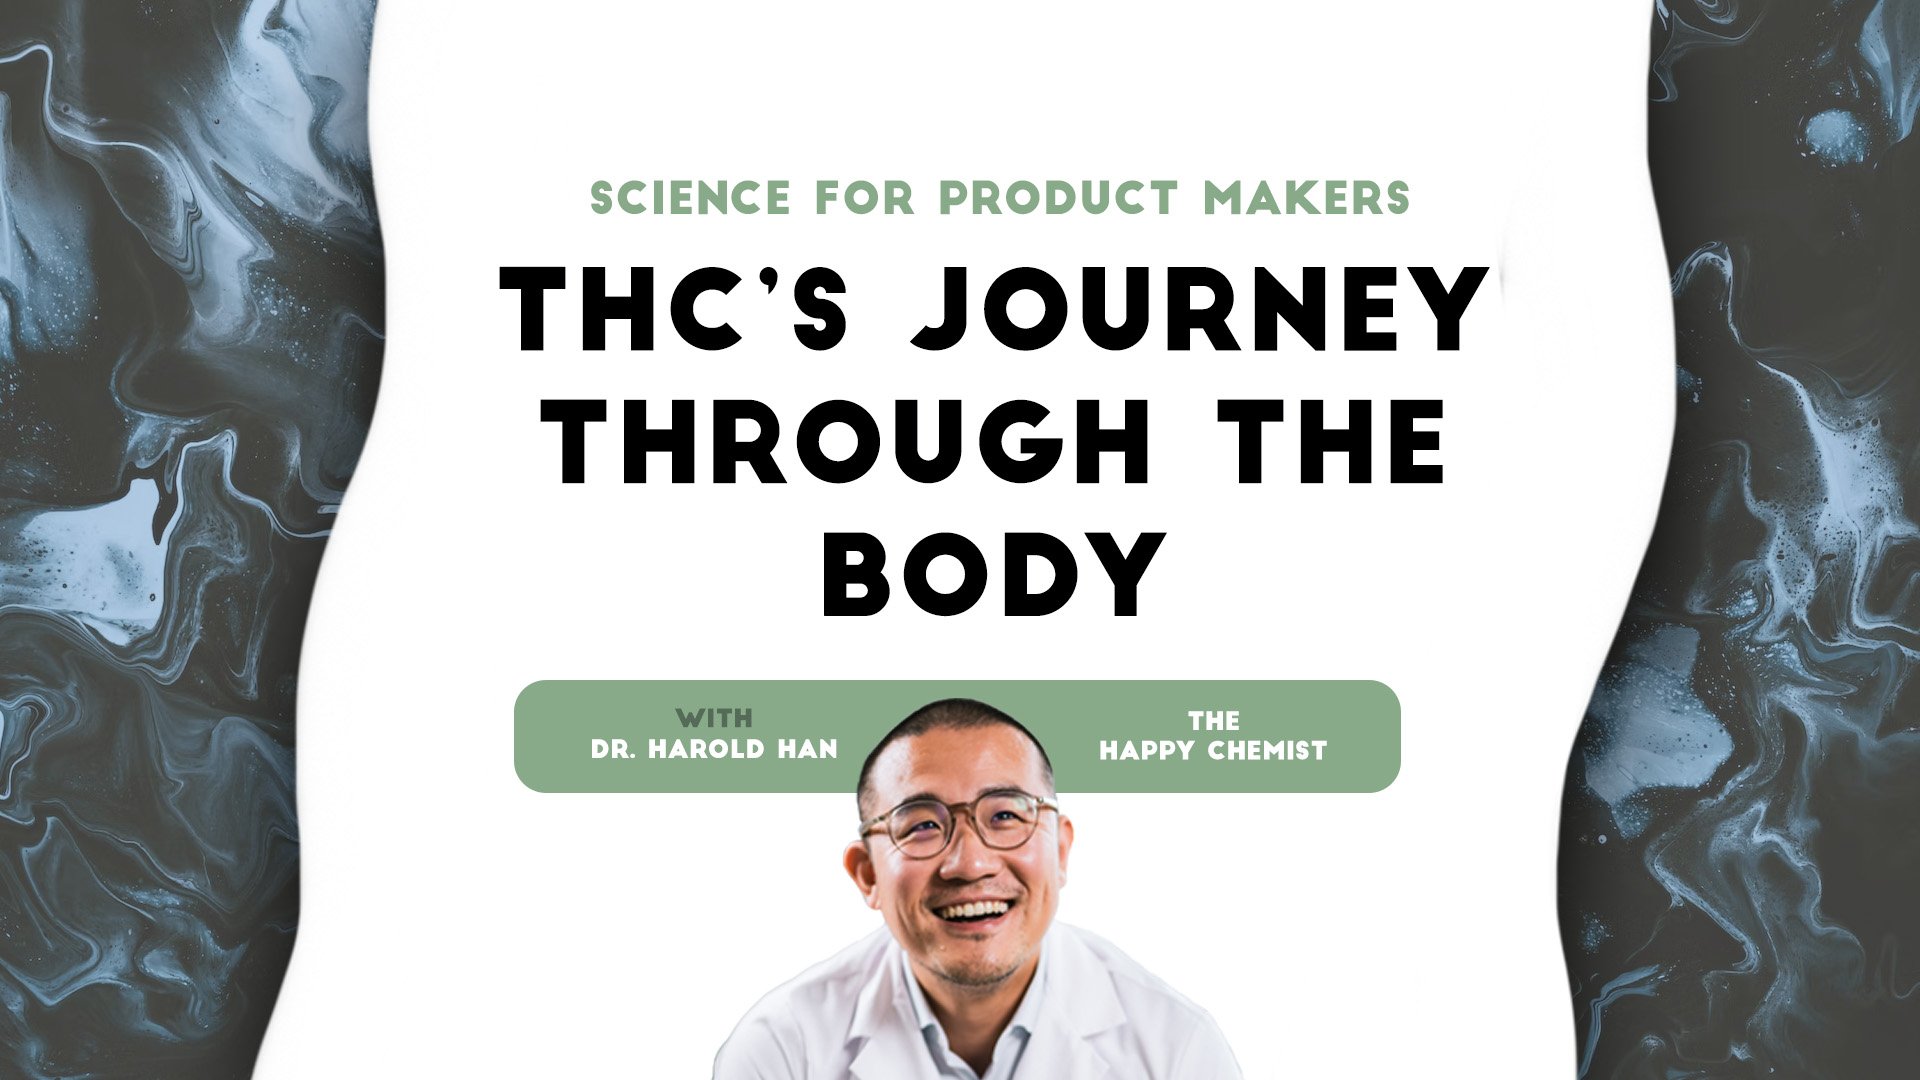 Science for product makers: THC’s journey through the body